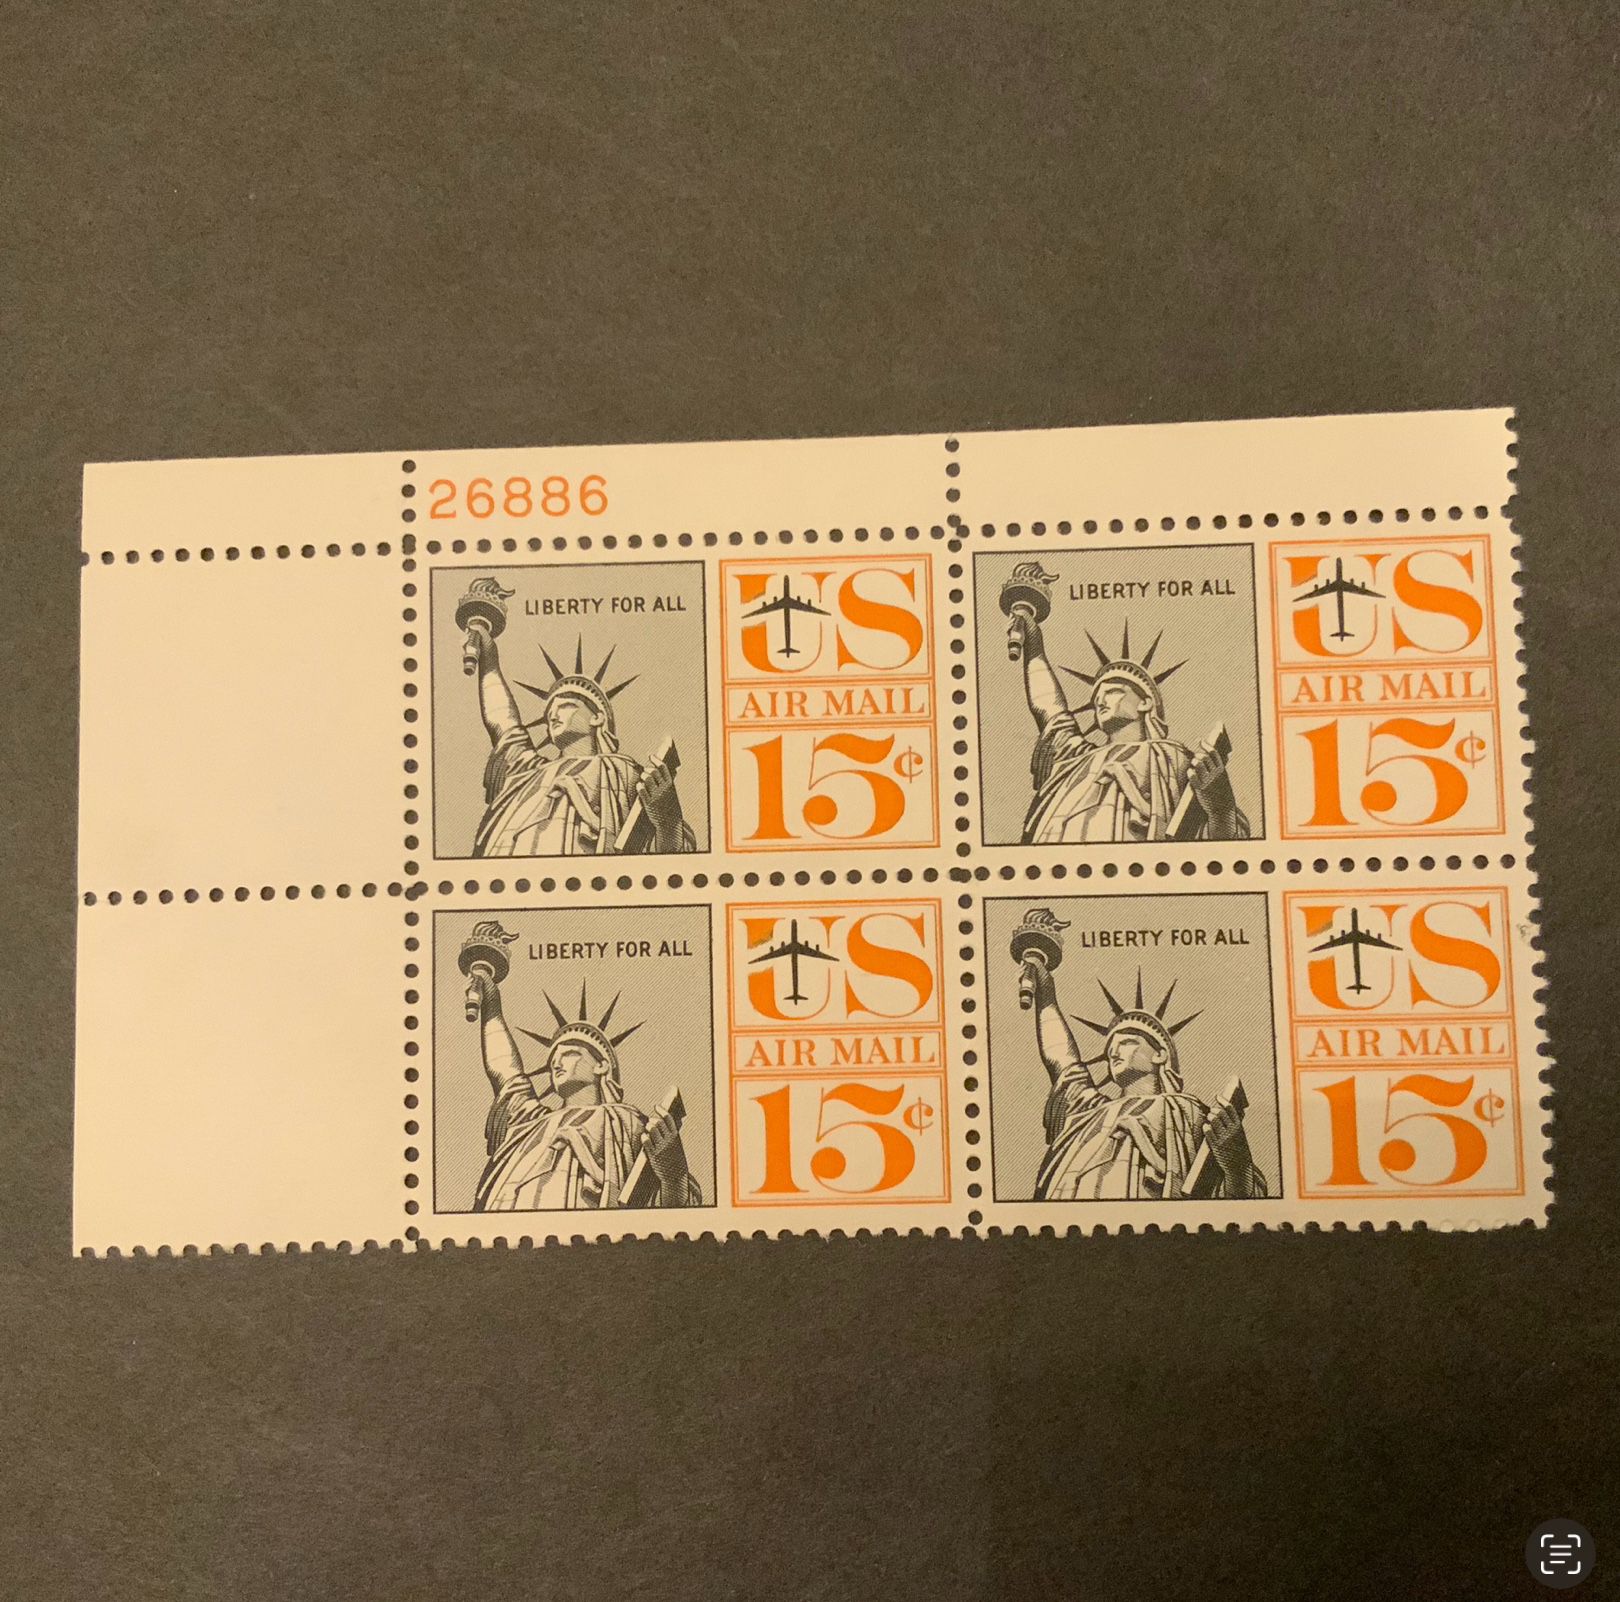 Statue of Liberty 15 cents Air Mail Stamps C58 